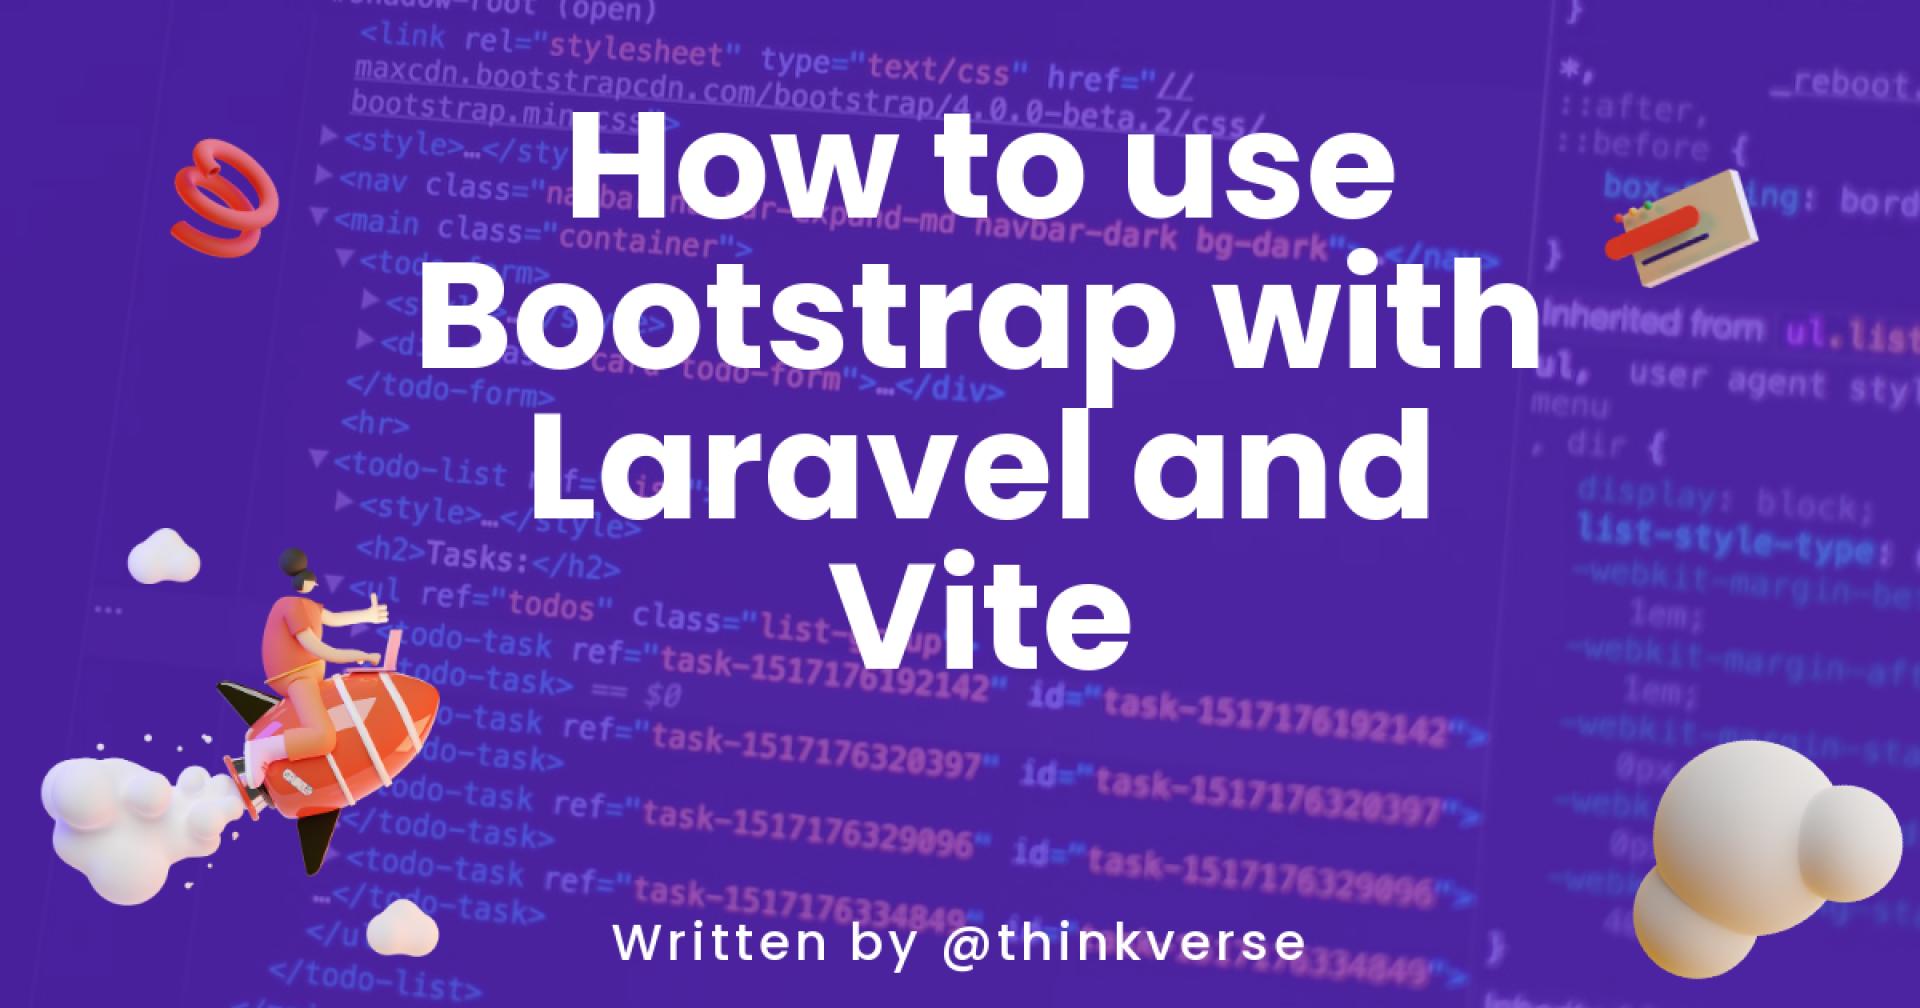 How to use Bootstrap with Laravel and Vite